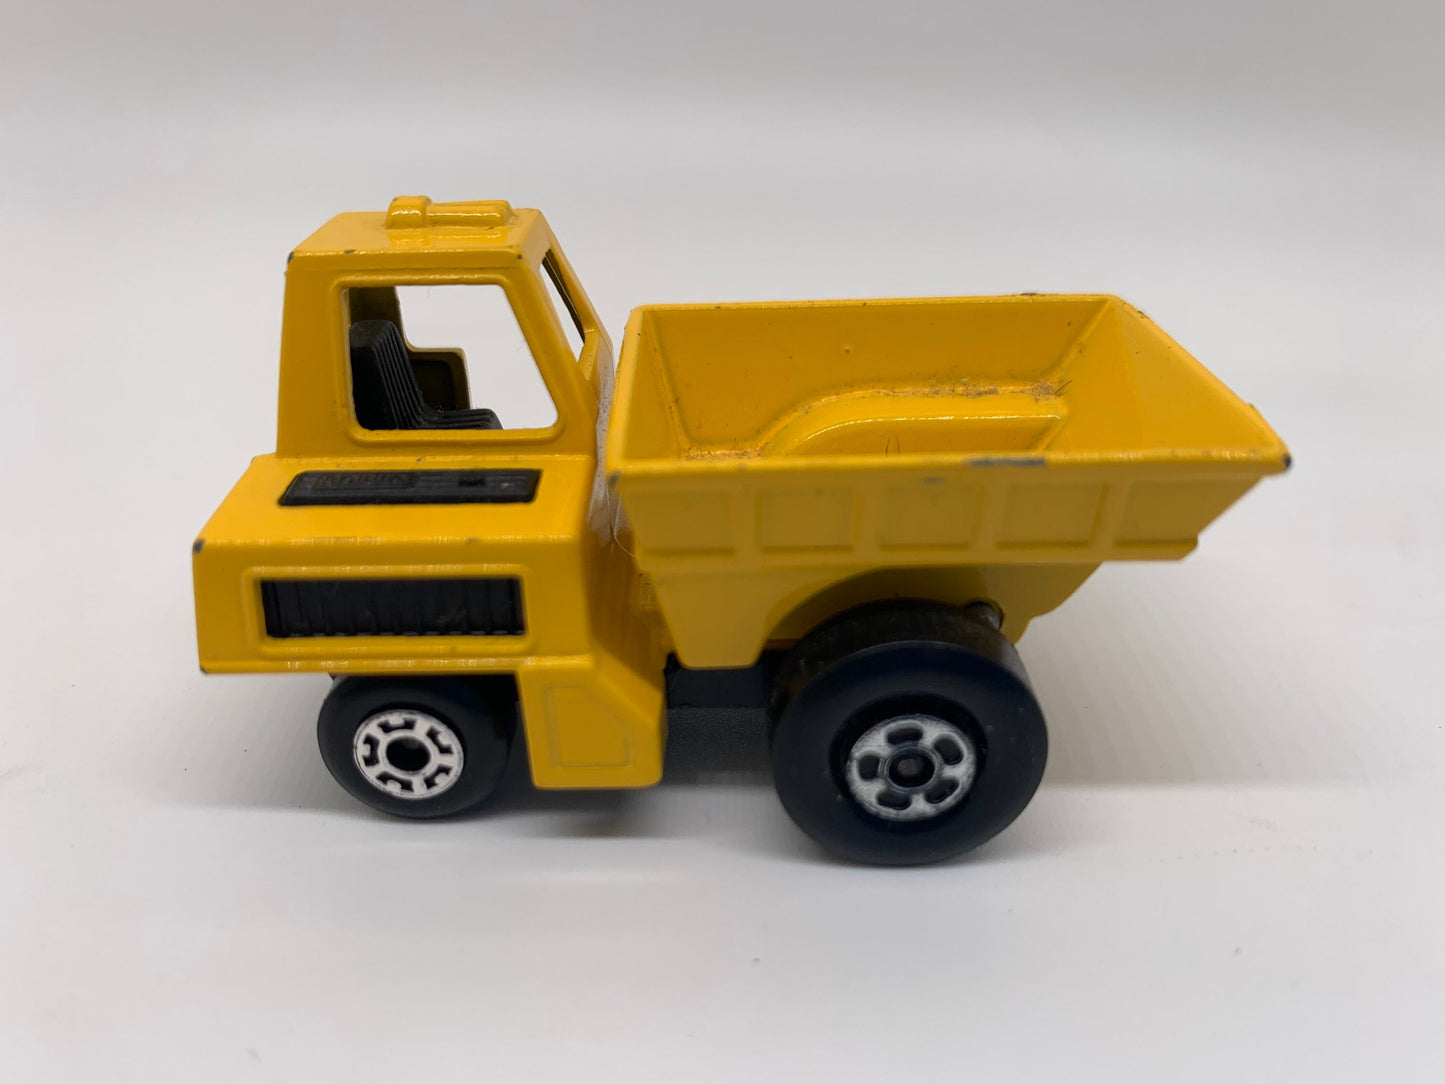 Matchbox Site Dumper Yellow MB26 Matchbox 75 Perfect Birthday Gift Rare Miniature Collectable Model Toy Car